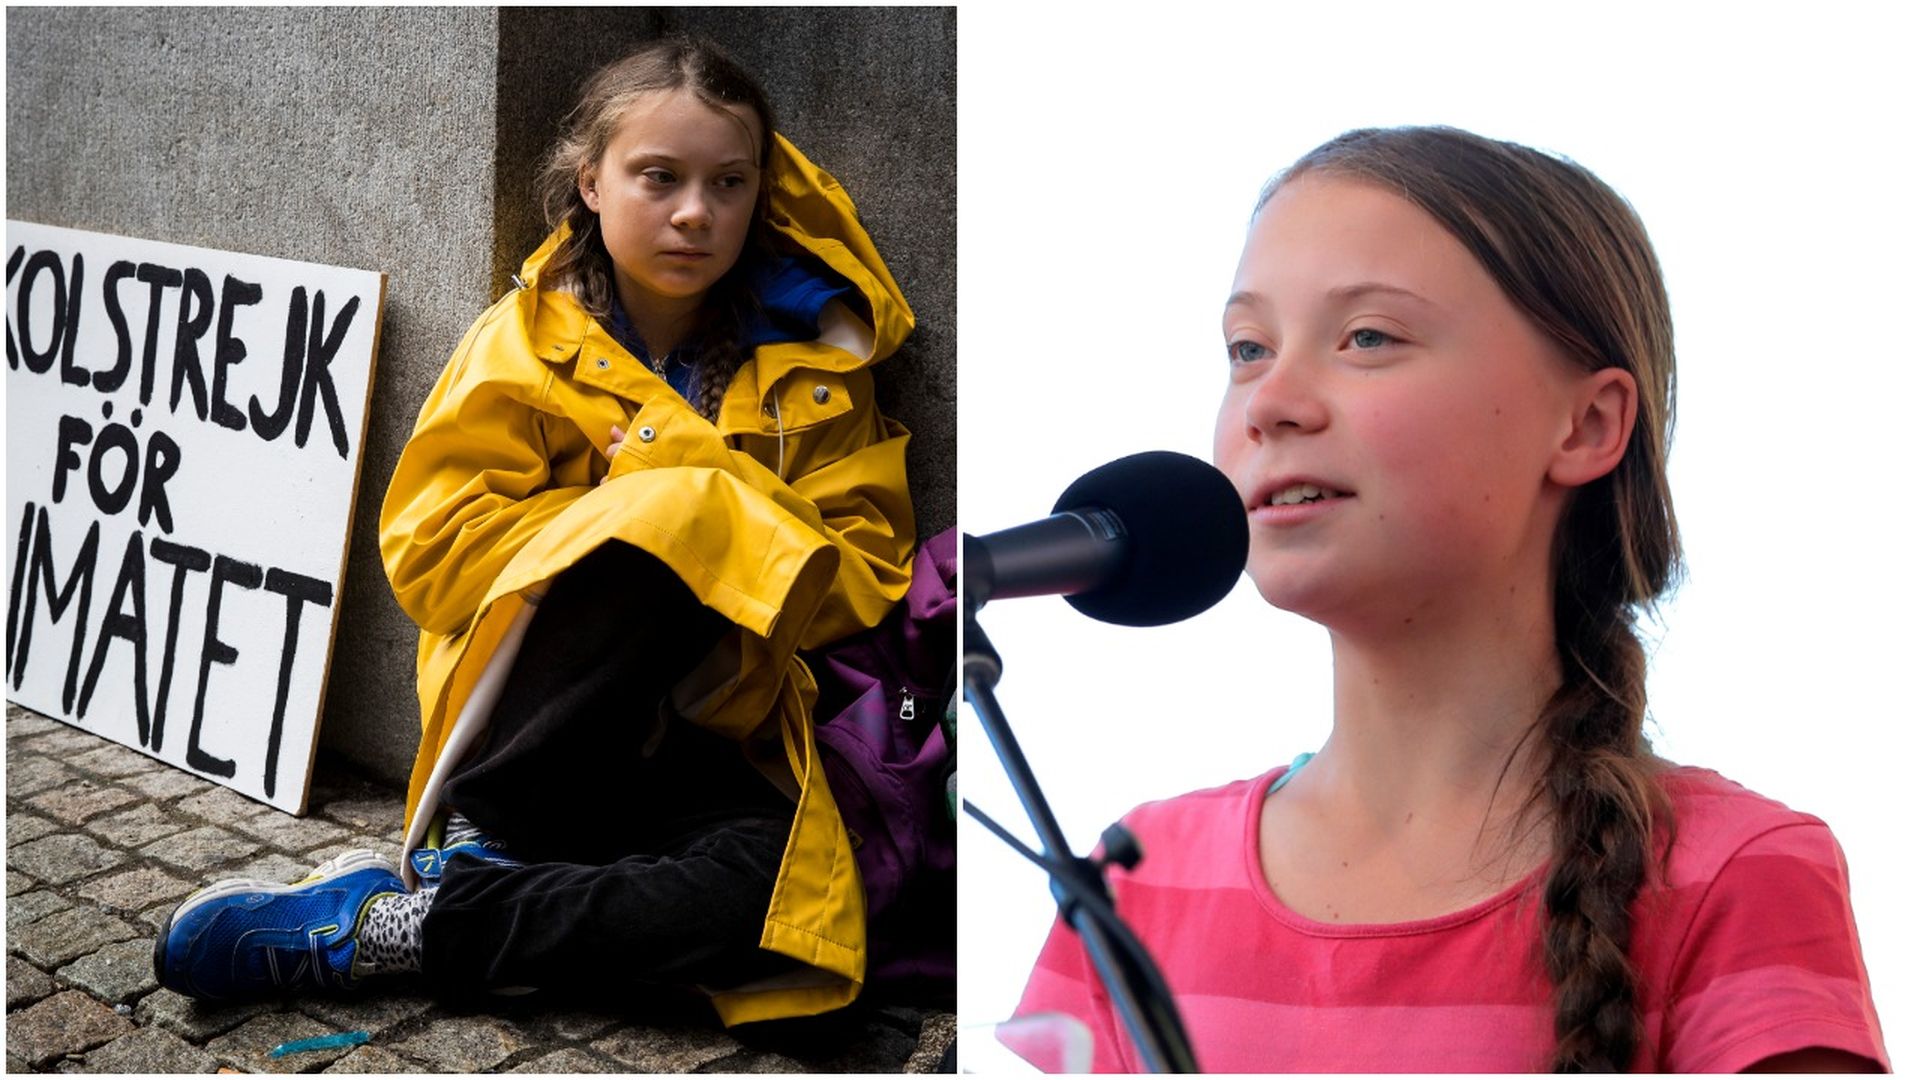 This image is a two-way screen of Greta Thunberg sitting in a yellow raincoat and Greta speaking into a microphone.